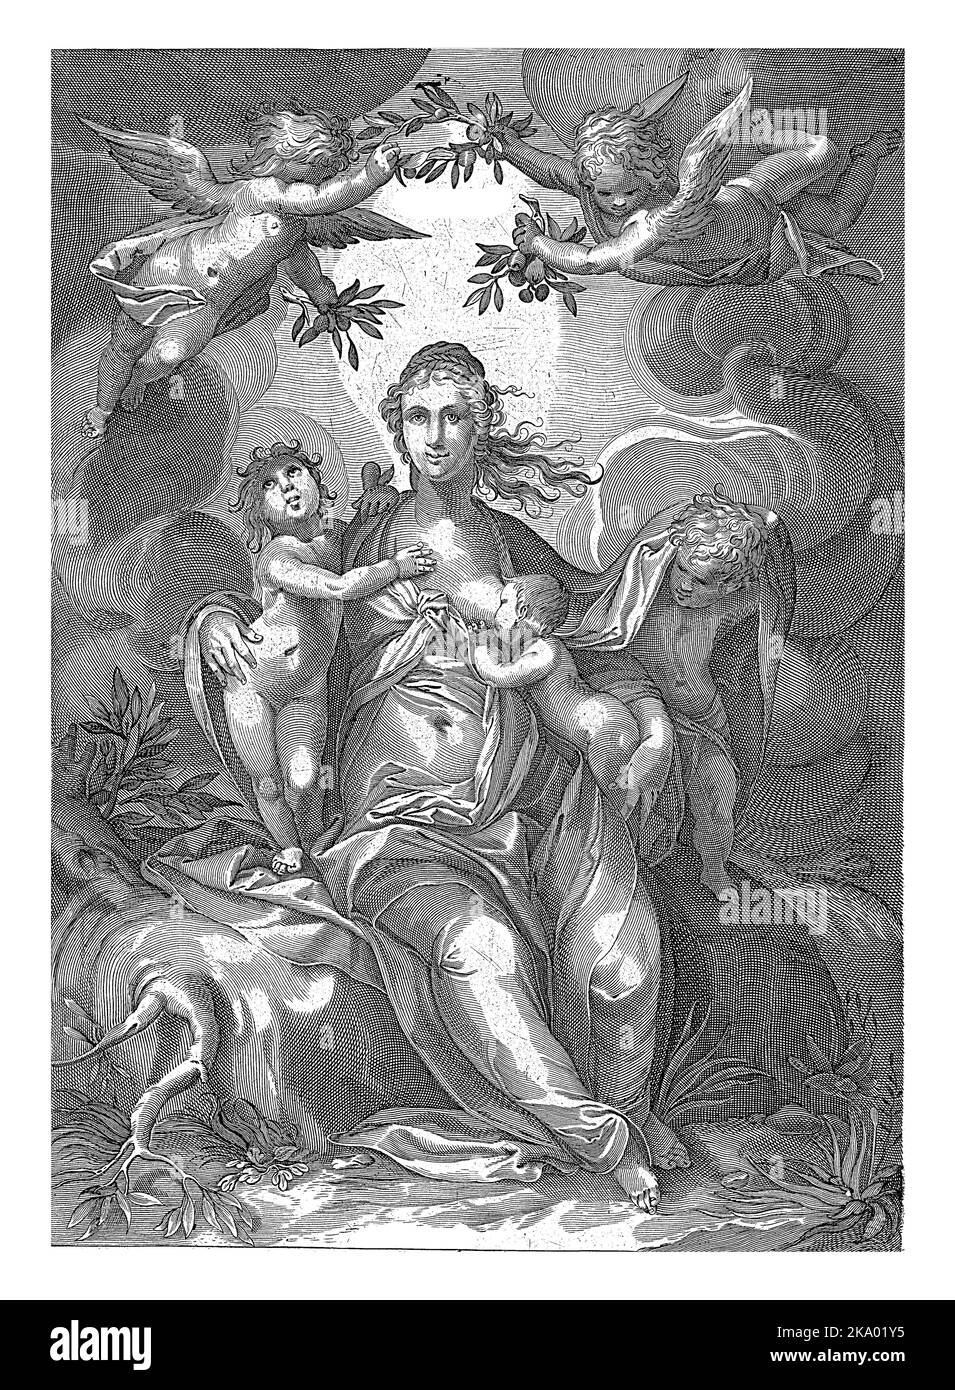 The female personification of Love, one of the three divine virtues, suckles a child and embraces two children standing next to her. Putti flying abov Stock Photo